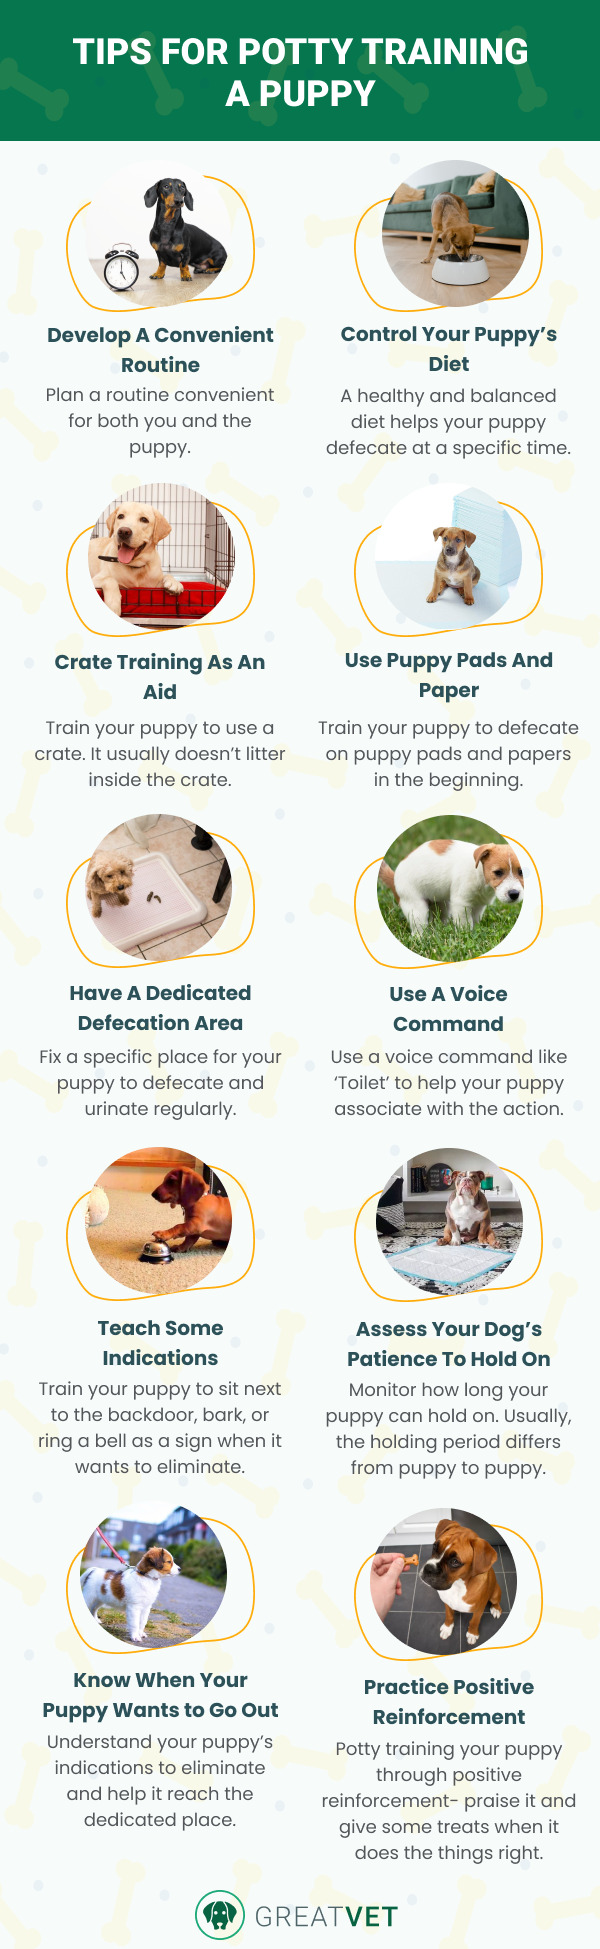 Potty Training a Puppy Tips